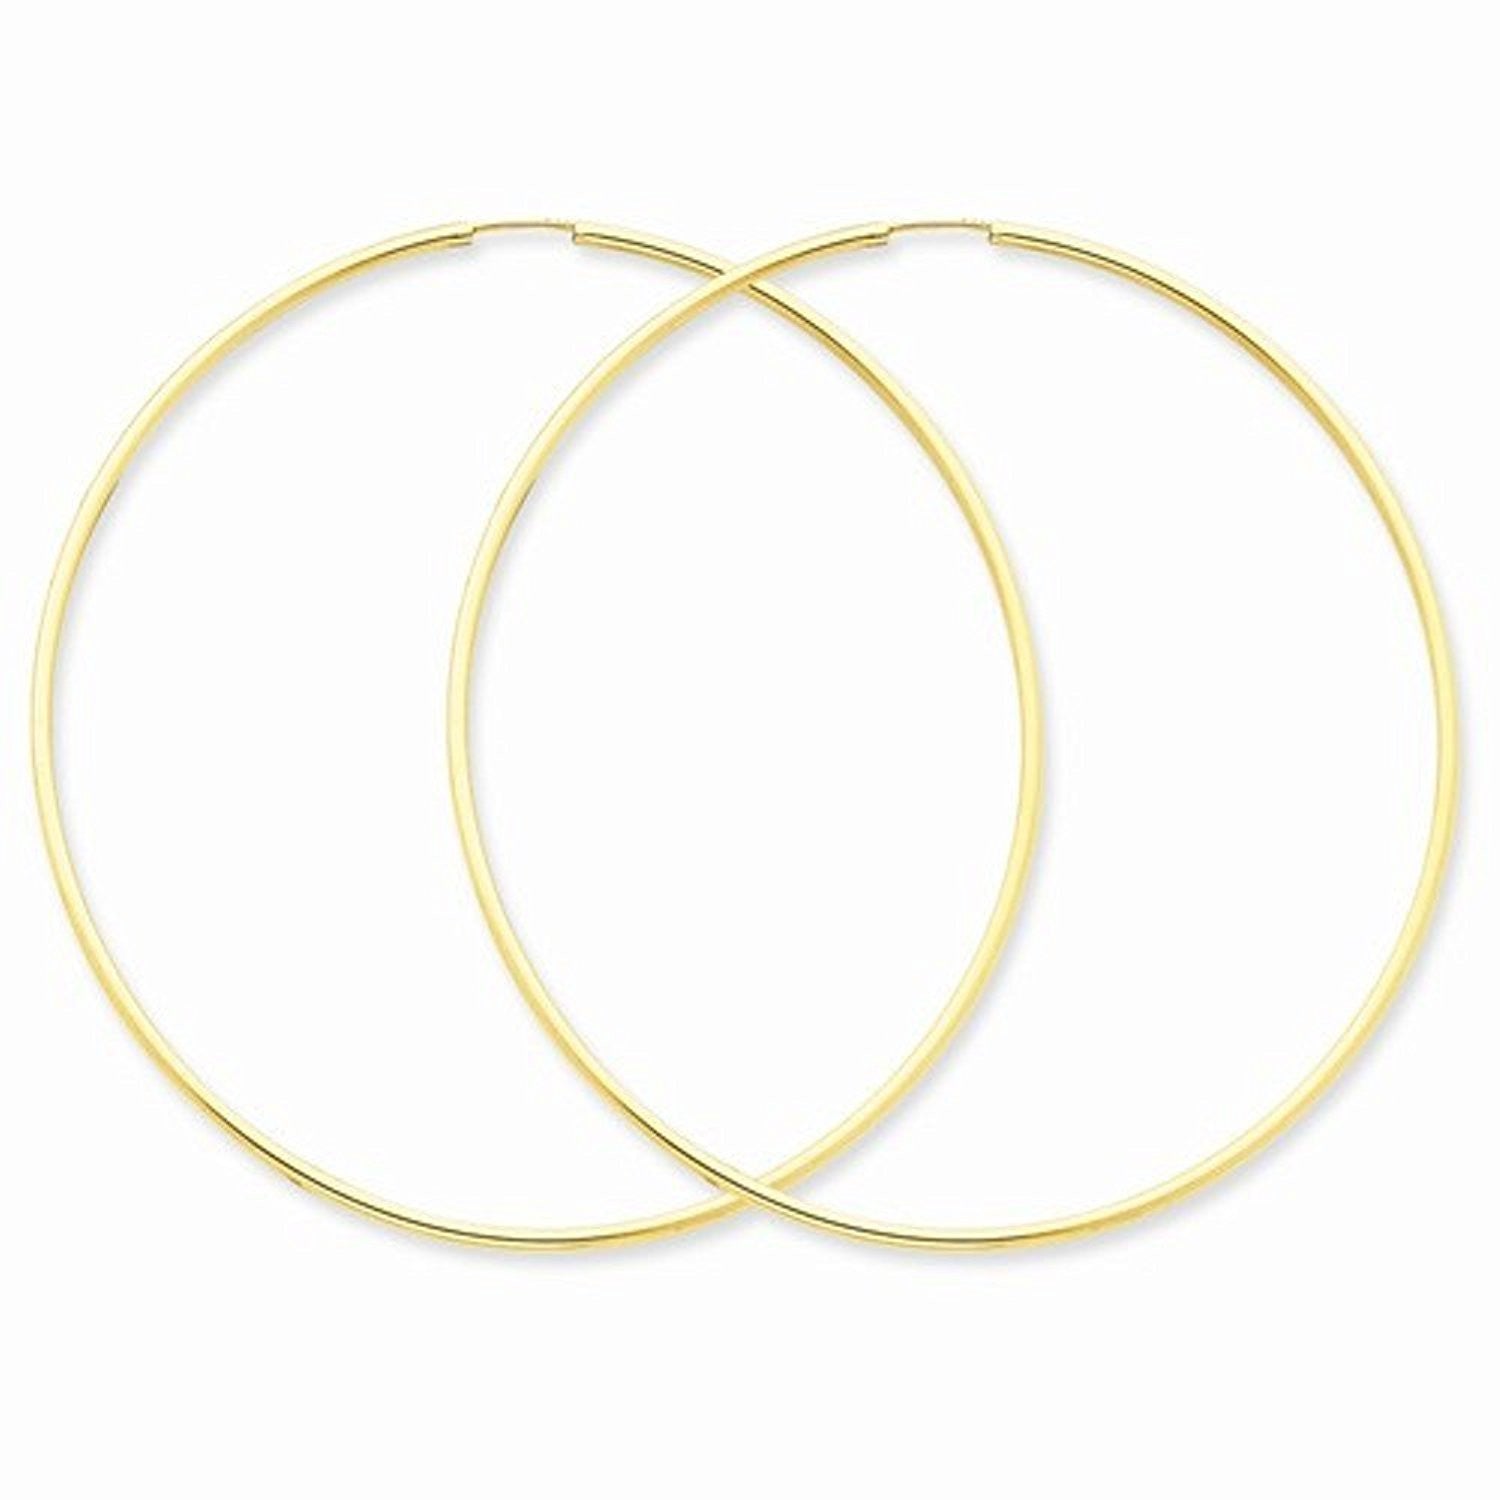 14K Yellow Gold 60mm x 1.5mm Endless Round Hoop Earrings